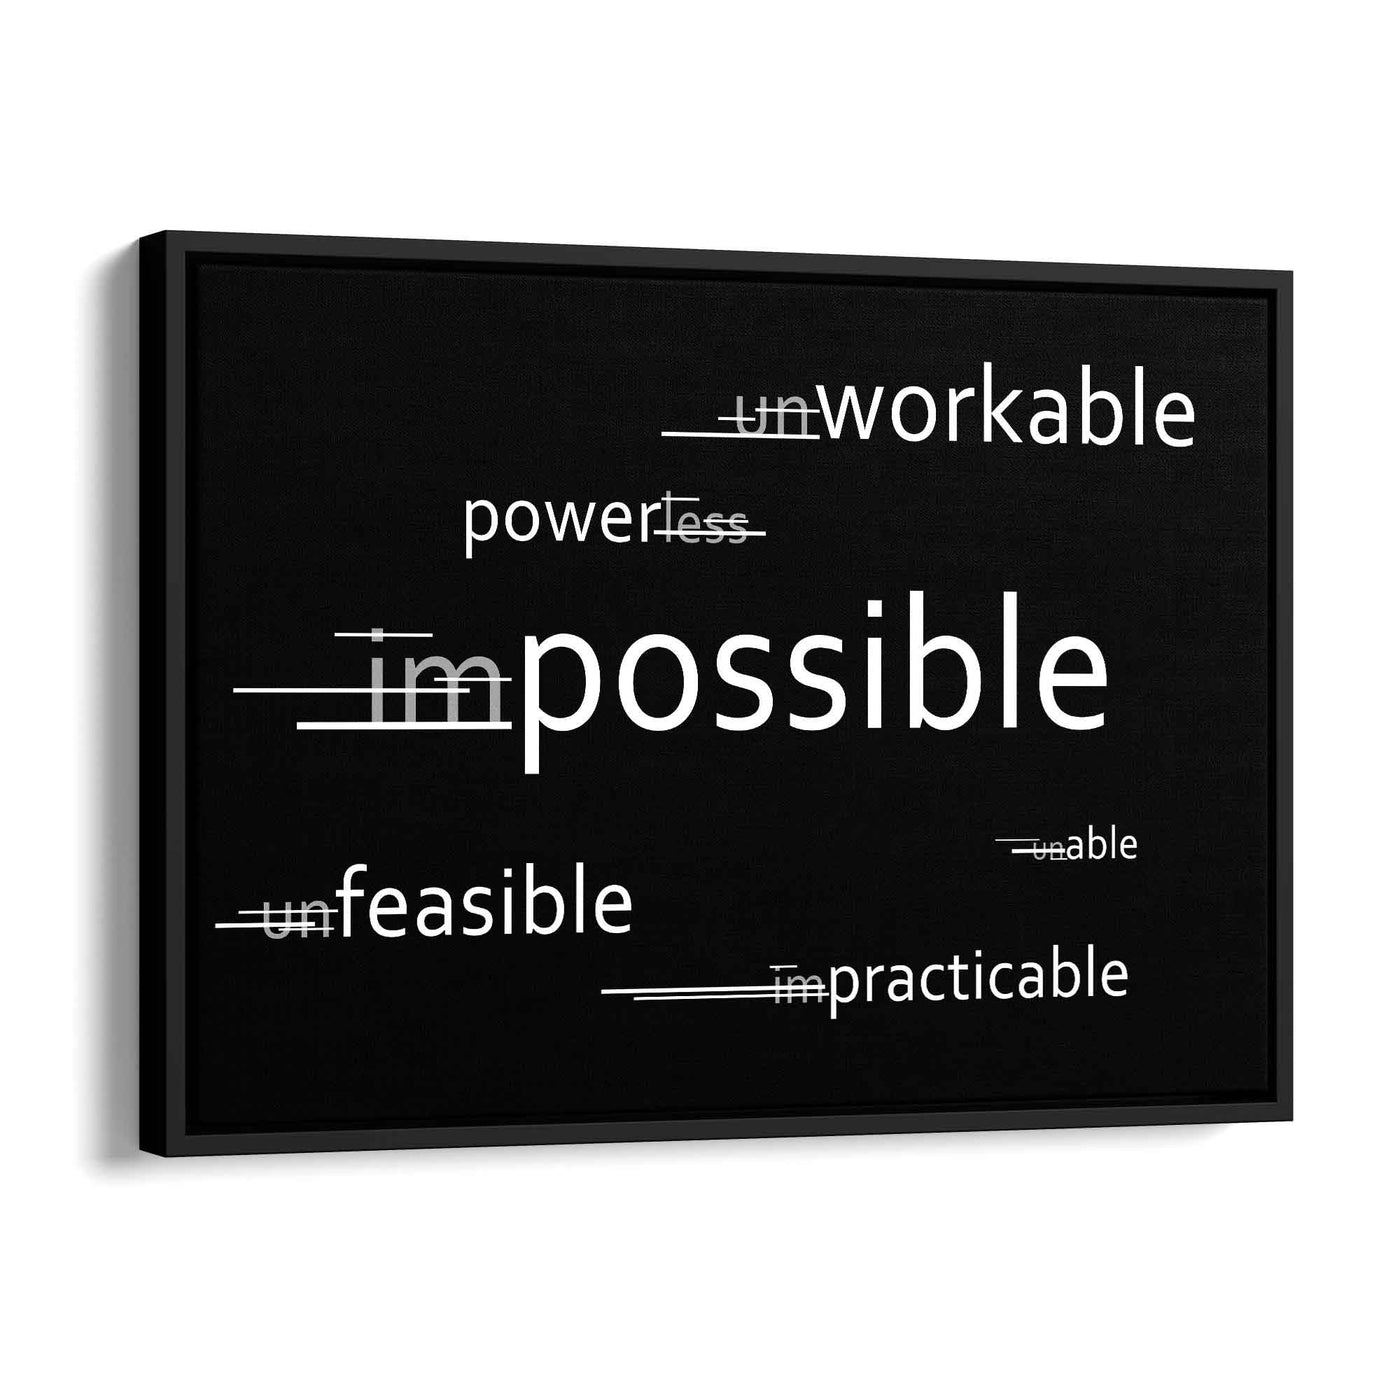 Possible - Power - Workable